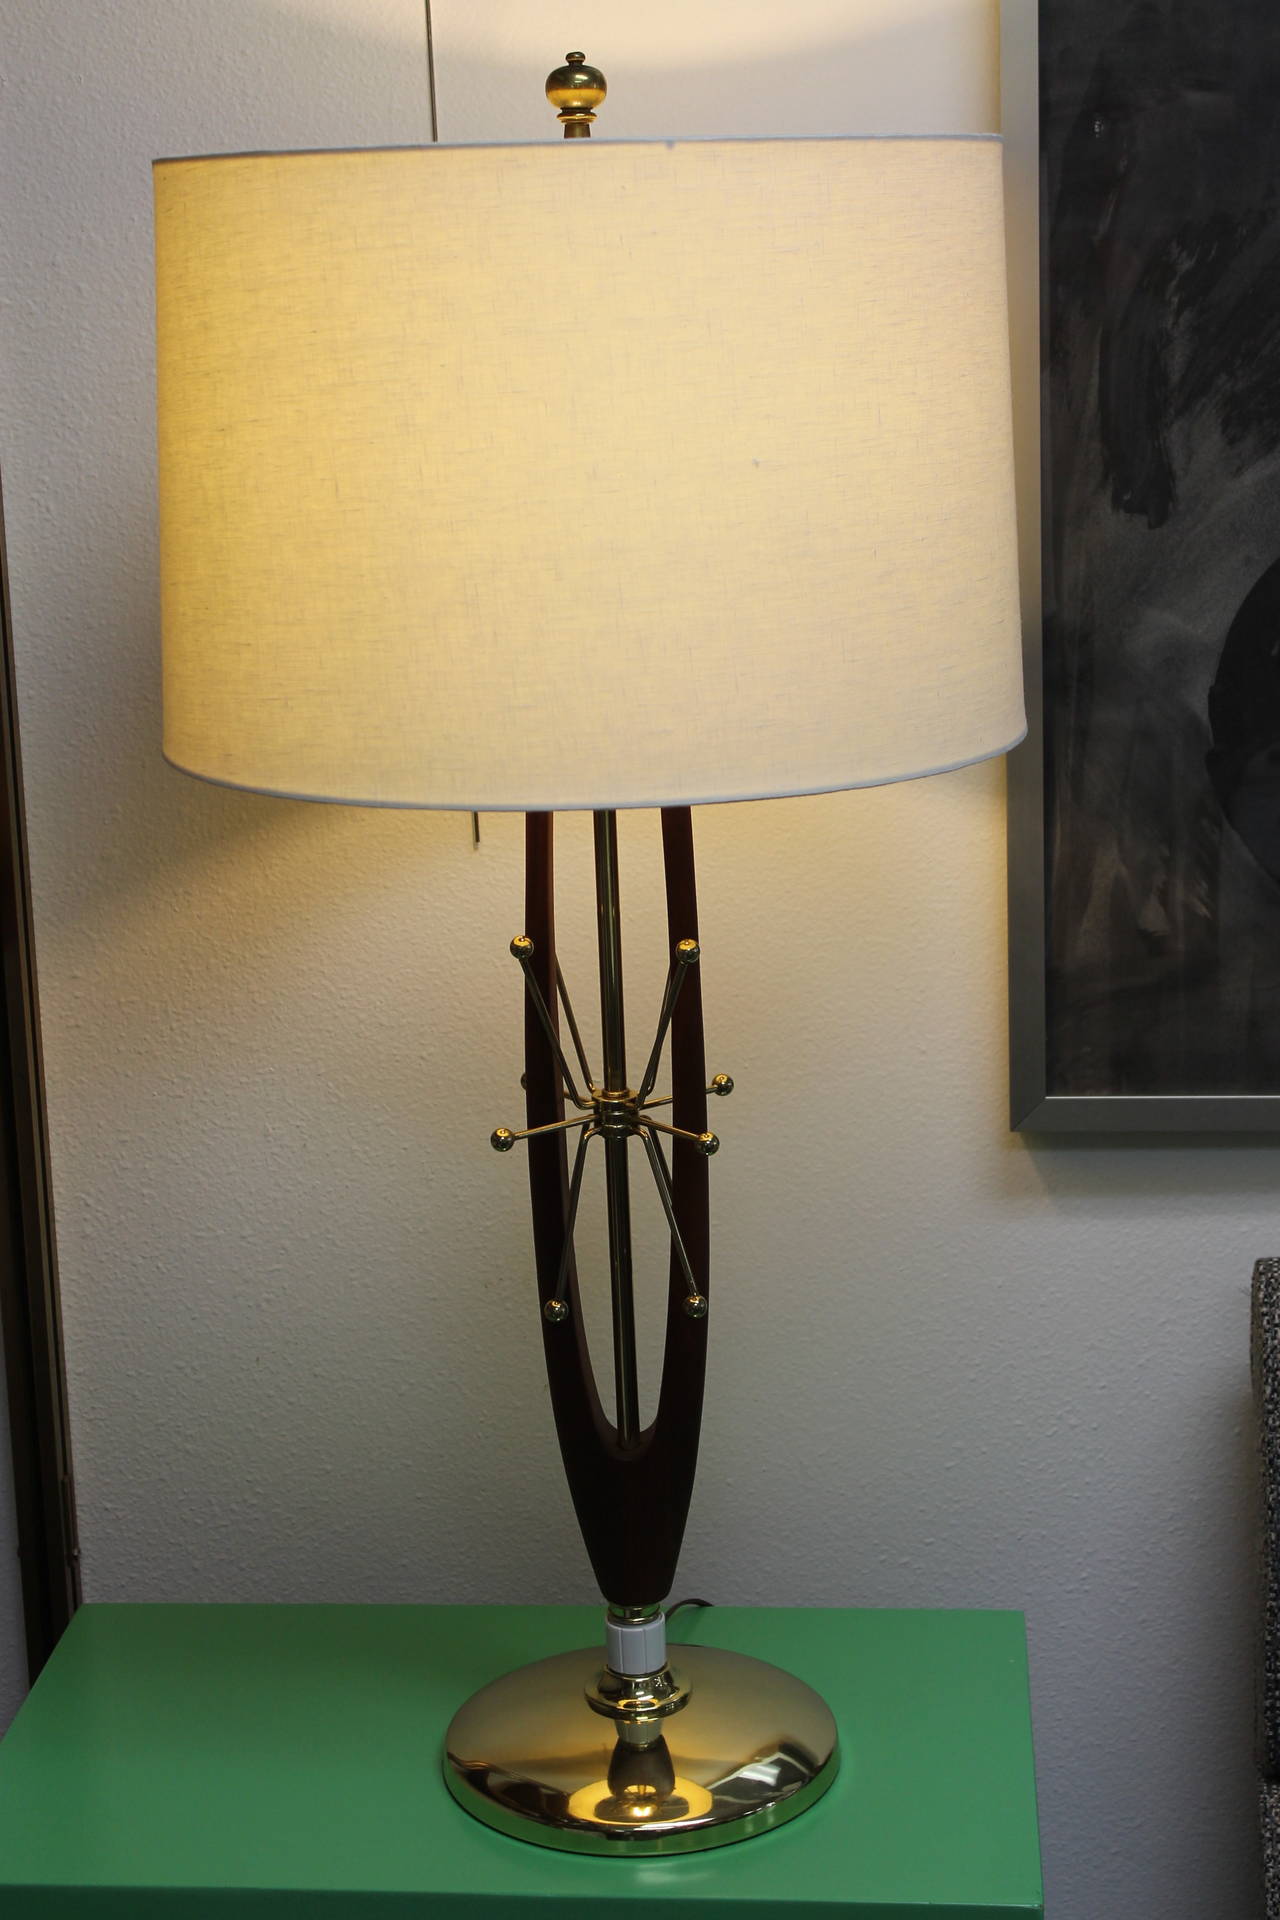 Incredible starburst/sputnik brass plated steel table lamp.  This lamp has been totally restored and rewired.  Base measures 9" diameter.  Wood portion is 20.5" high.  Height from base to the bottom of socket is 25".  Lamp shade not